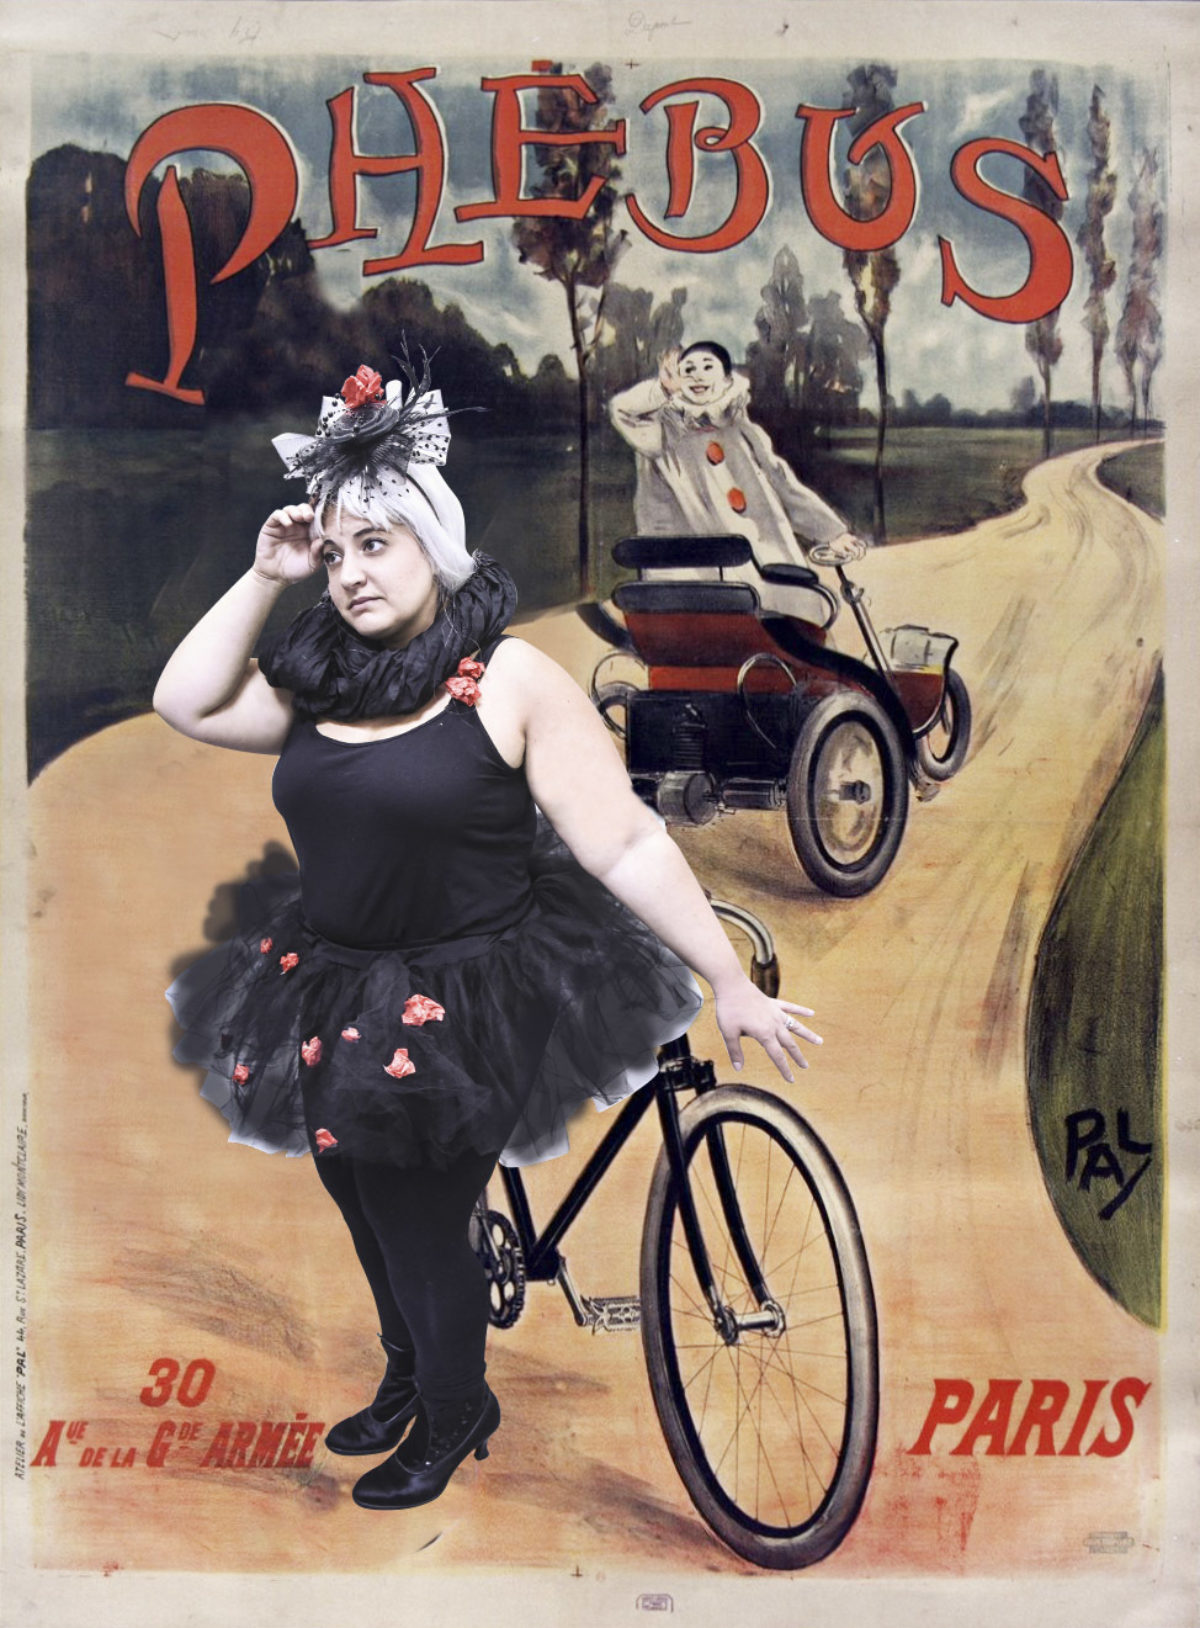 A woman in a black tutu is posing in a poster illustration filter of a clown in a small car.